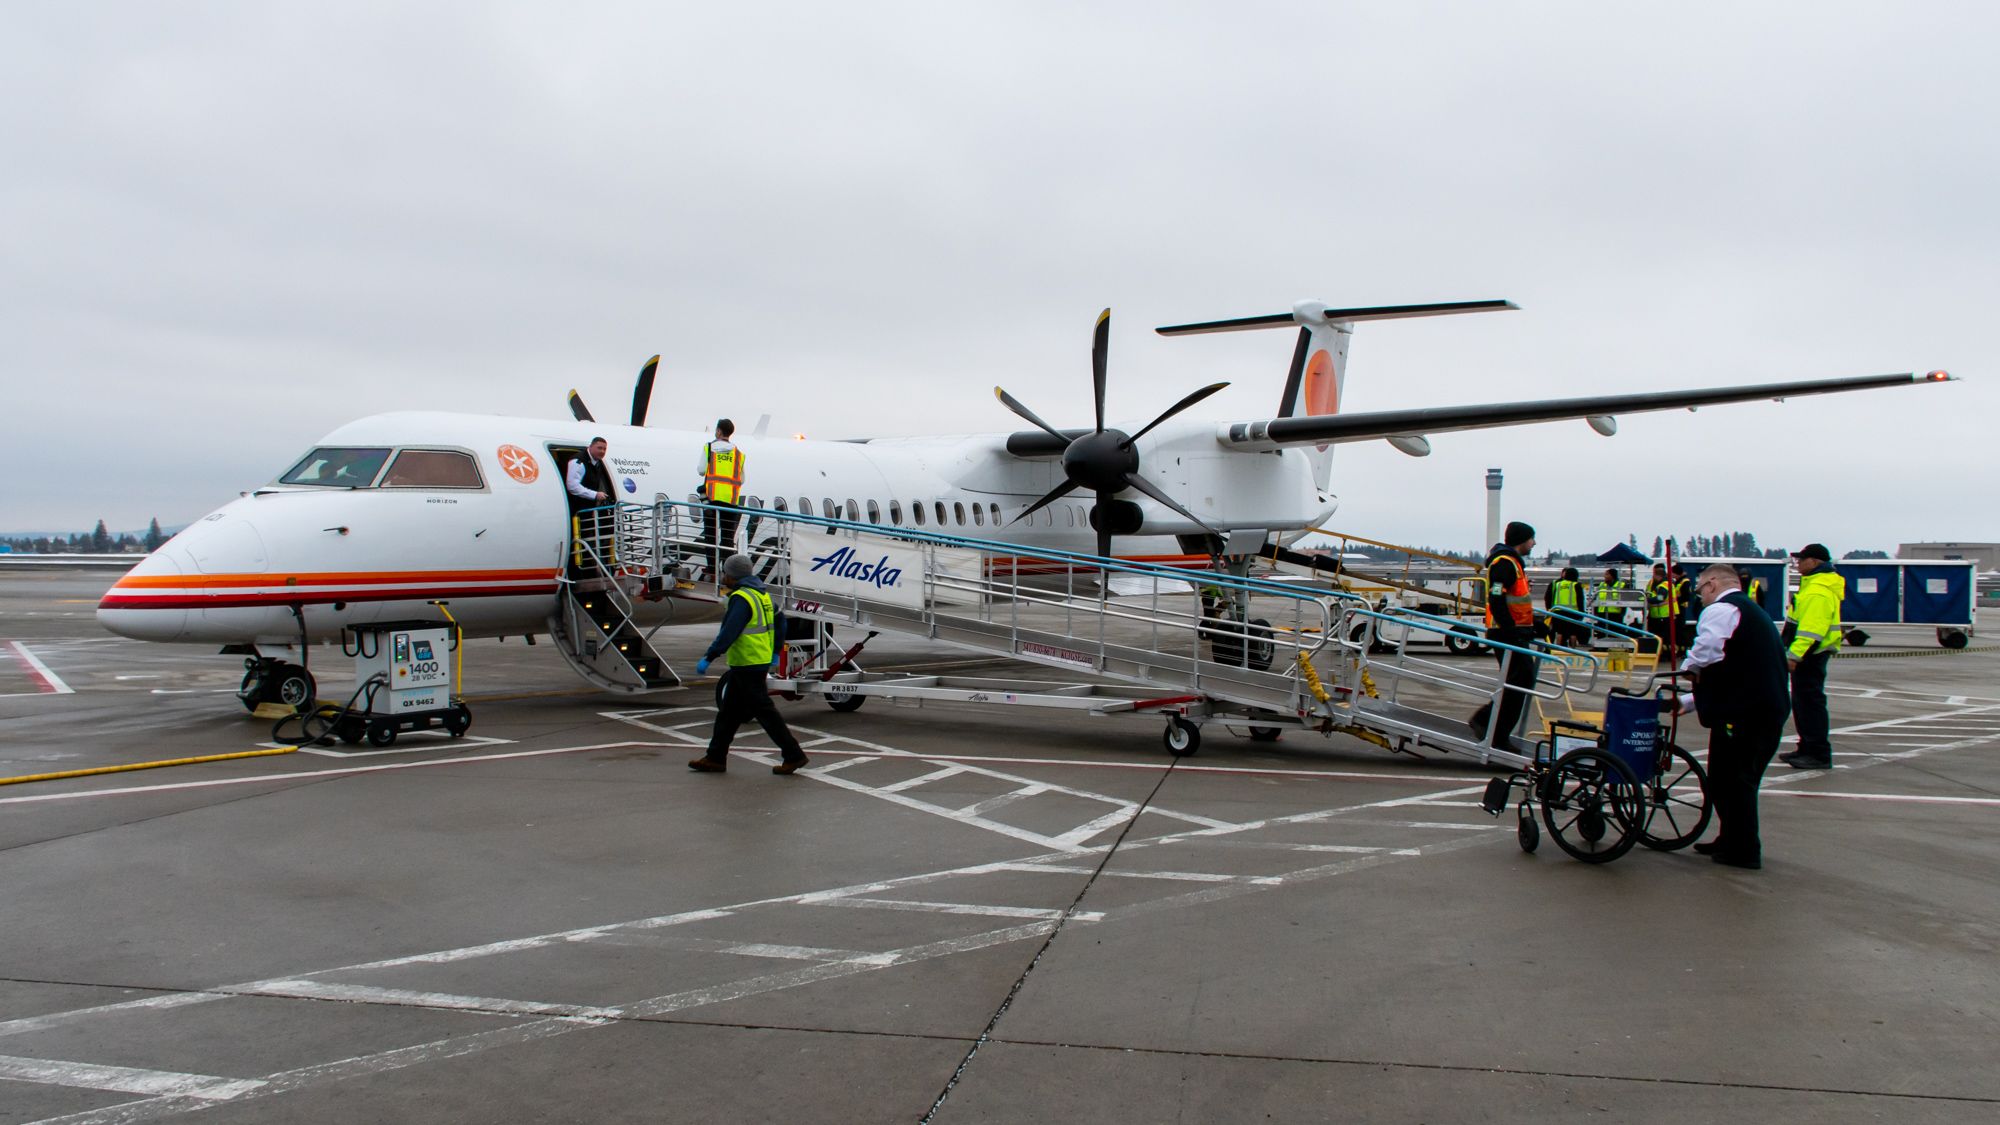 Wheelchair and Ramp Meeting Disabled Passenger on Meatball Q400